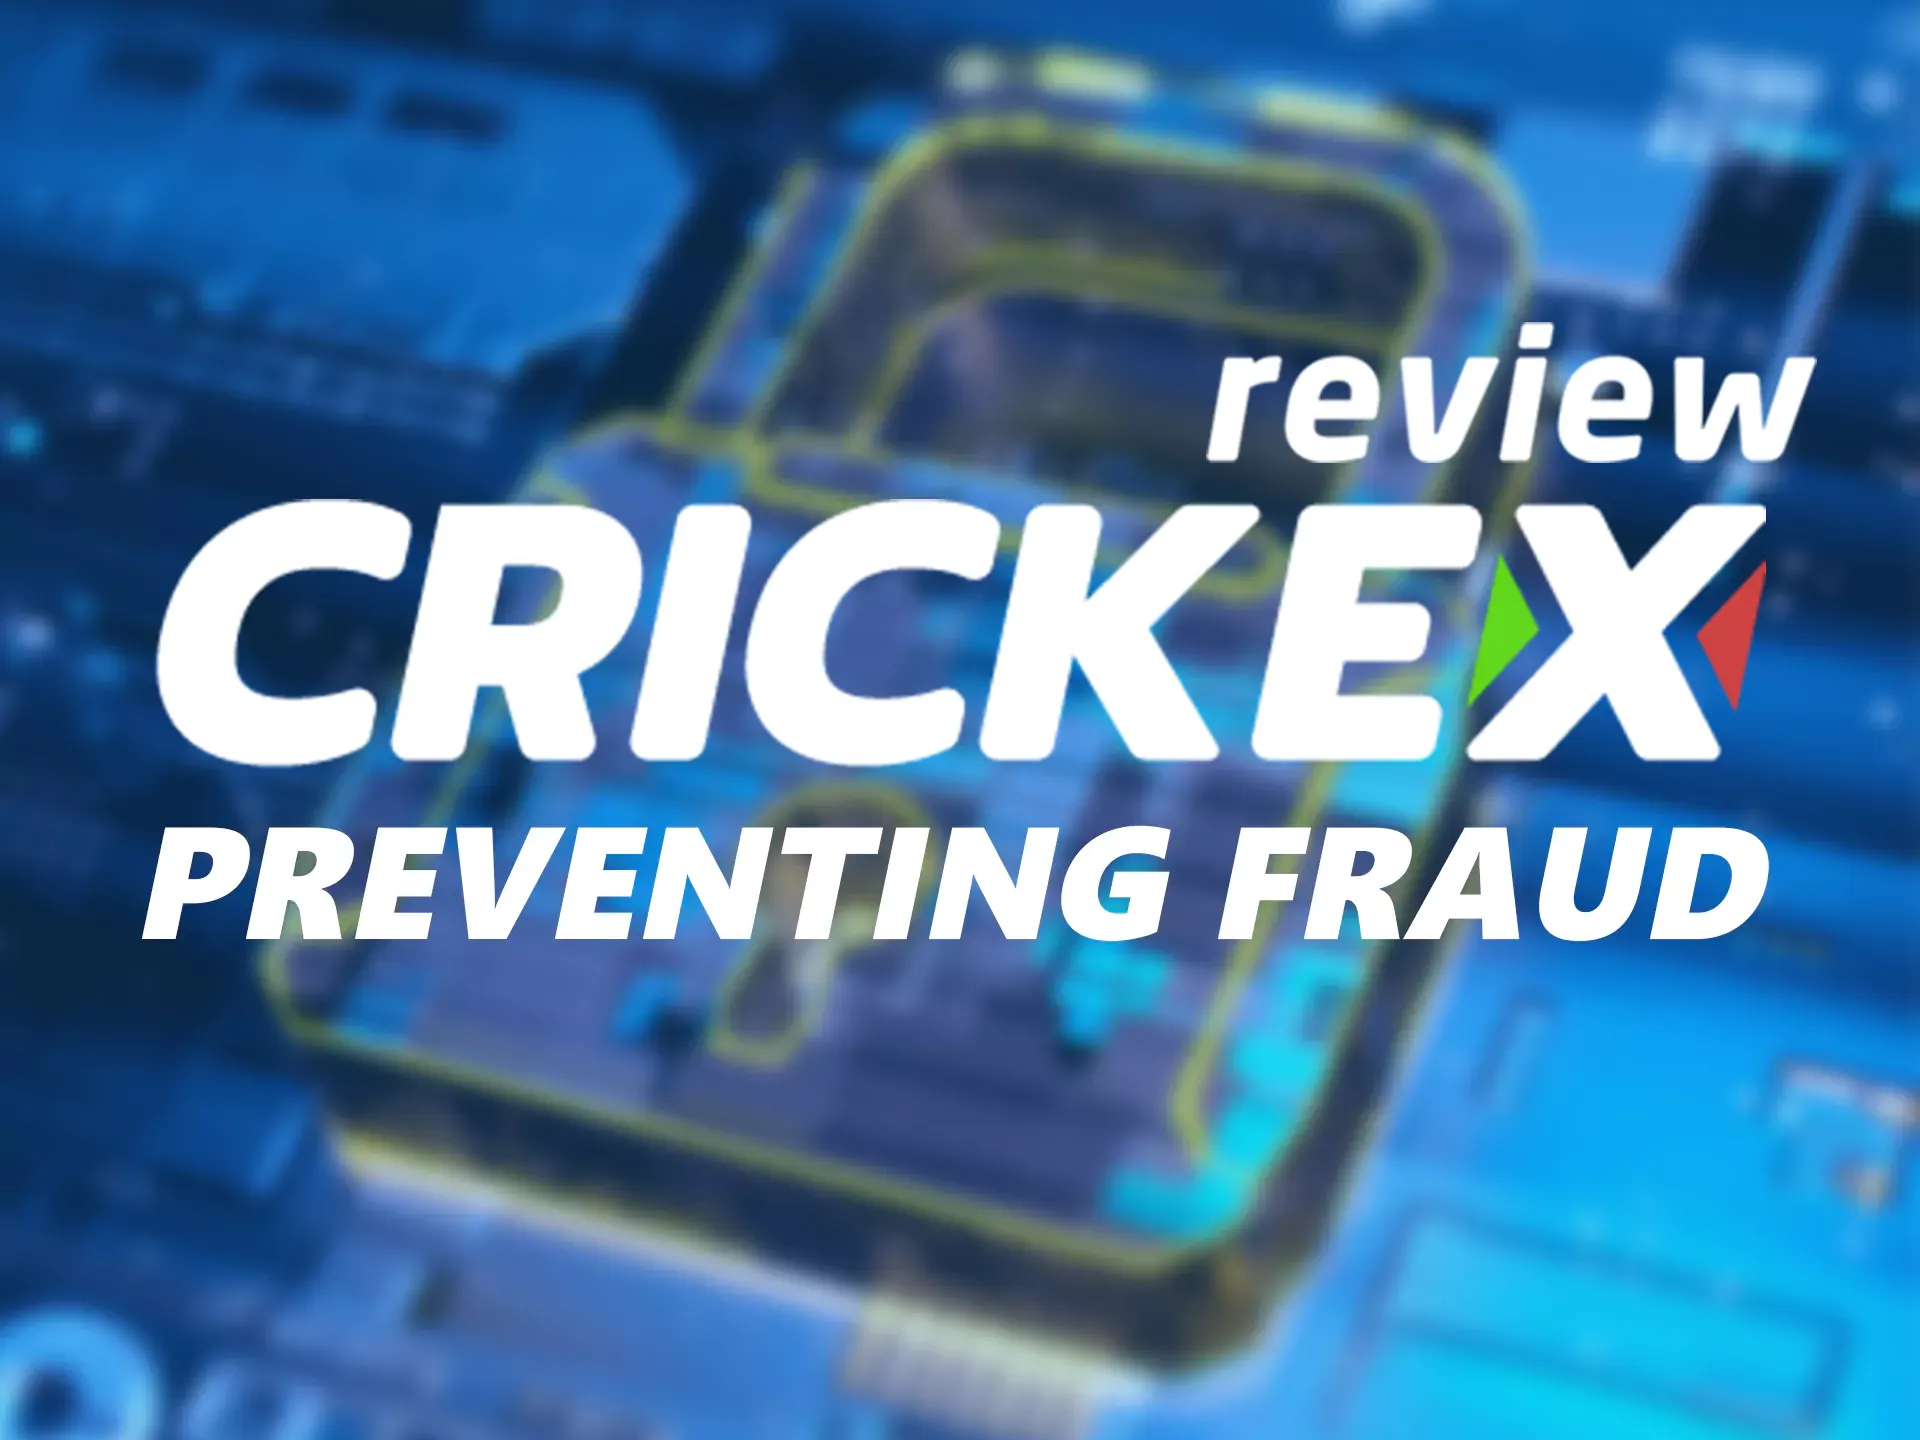 Crickex protects you from fraud.